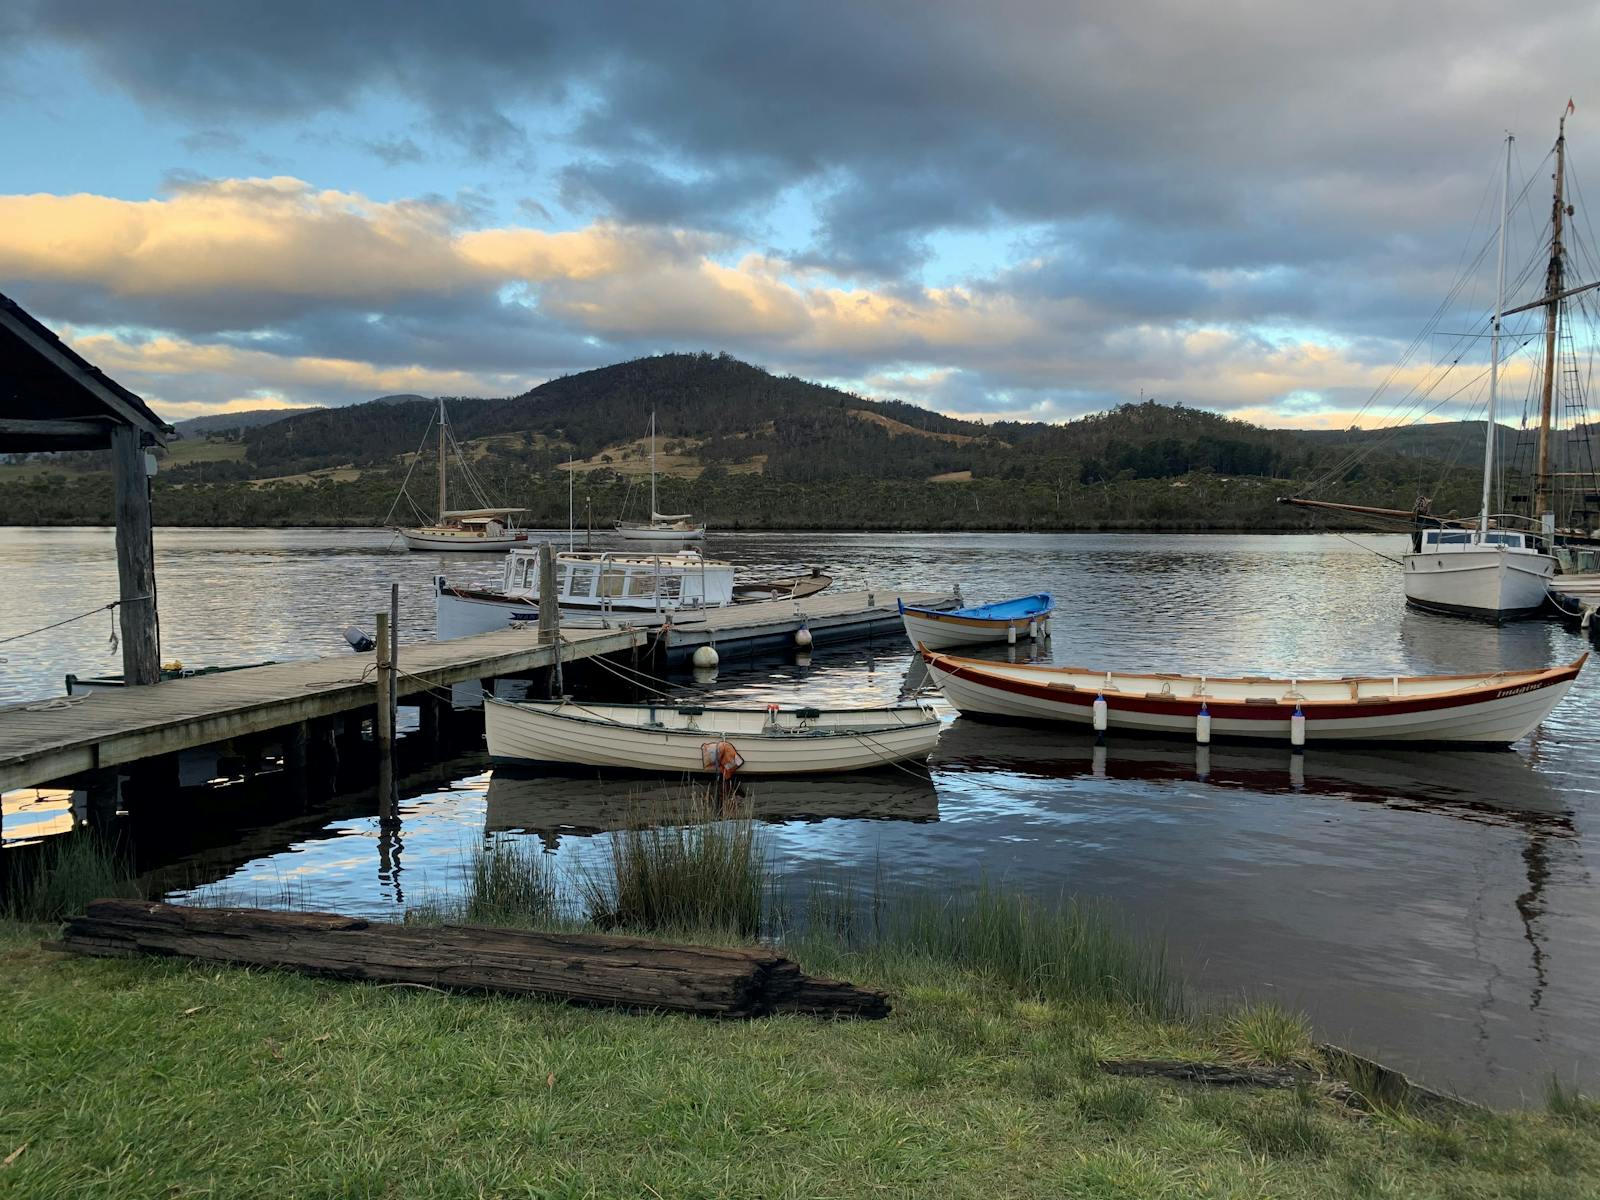 Wooden boats on the tranquil Huon River at Franklin Village